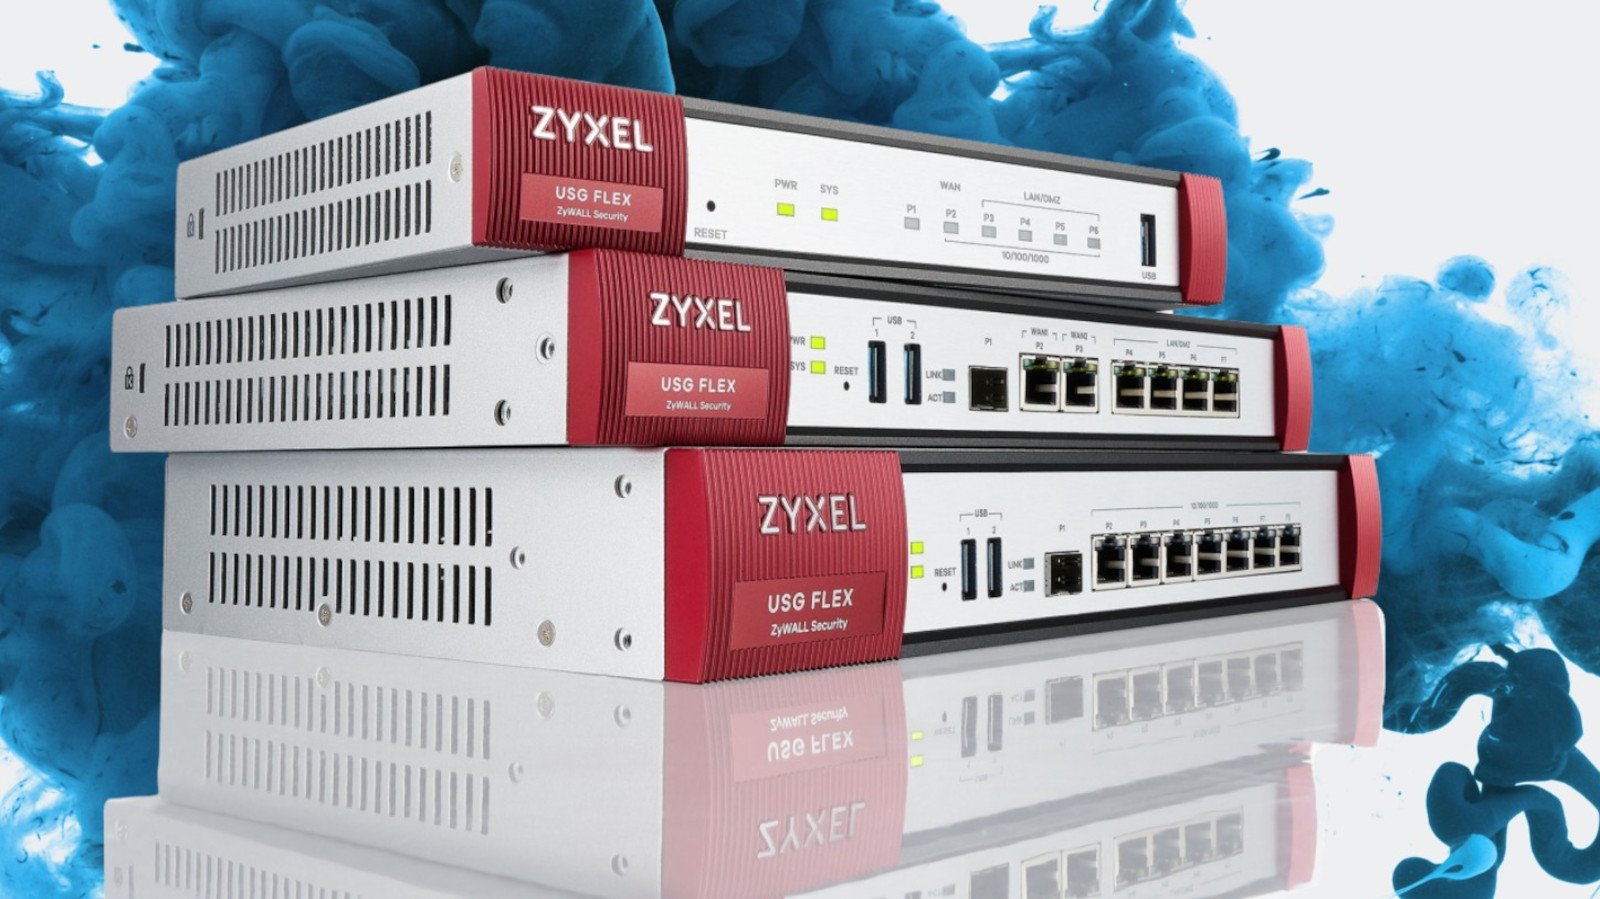 Zyxel firewall and VPN devices affected by critical flaws